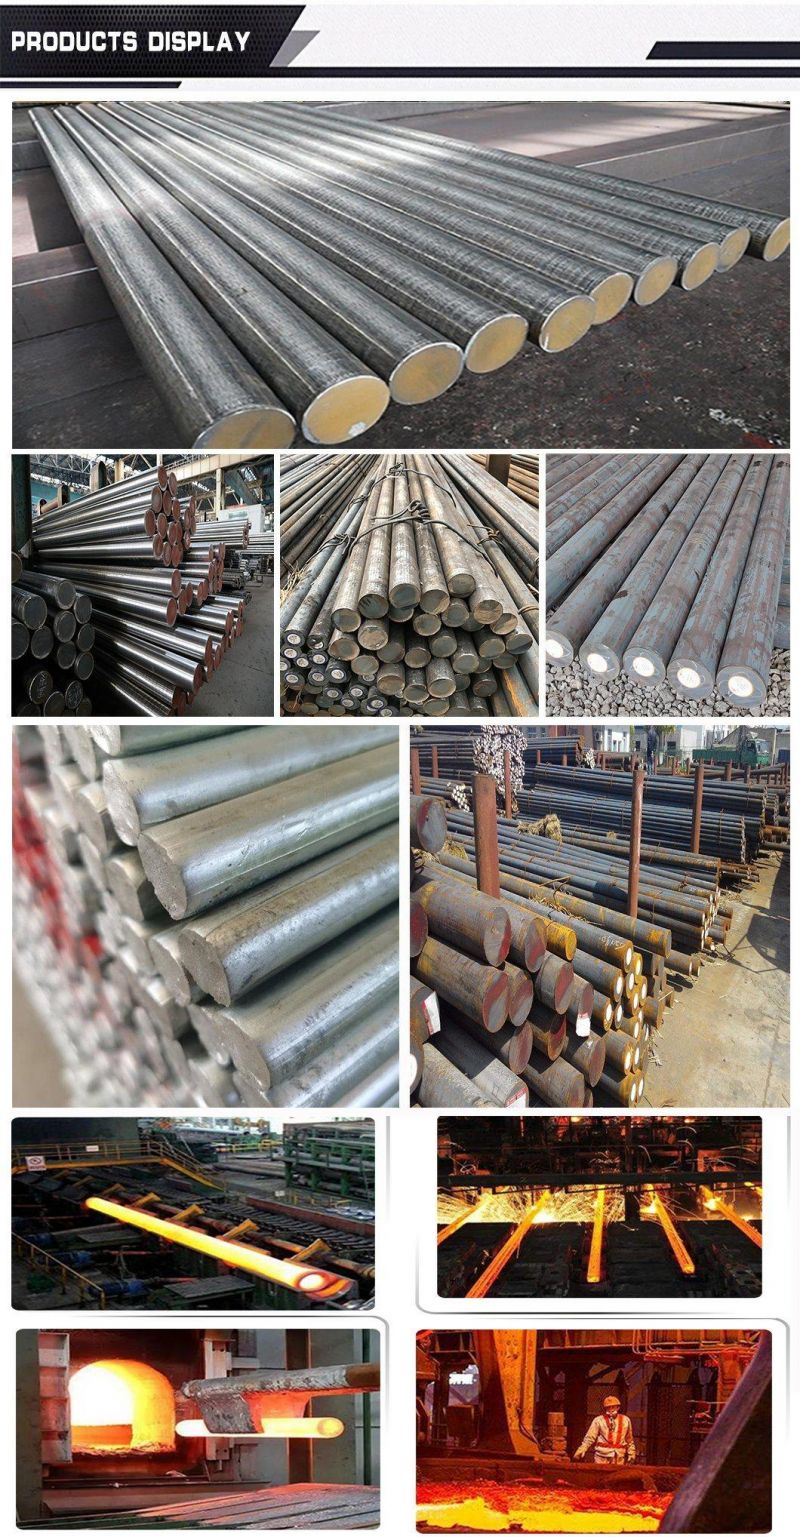 China Hot Rolled Q235/Q235B 6mm 300mm GB Standard Carbon Steel Round Bar Price Low for Building Material